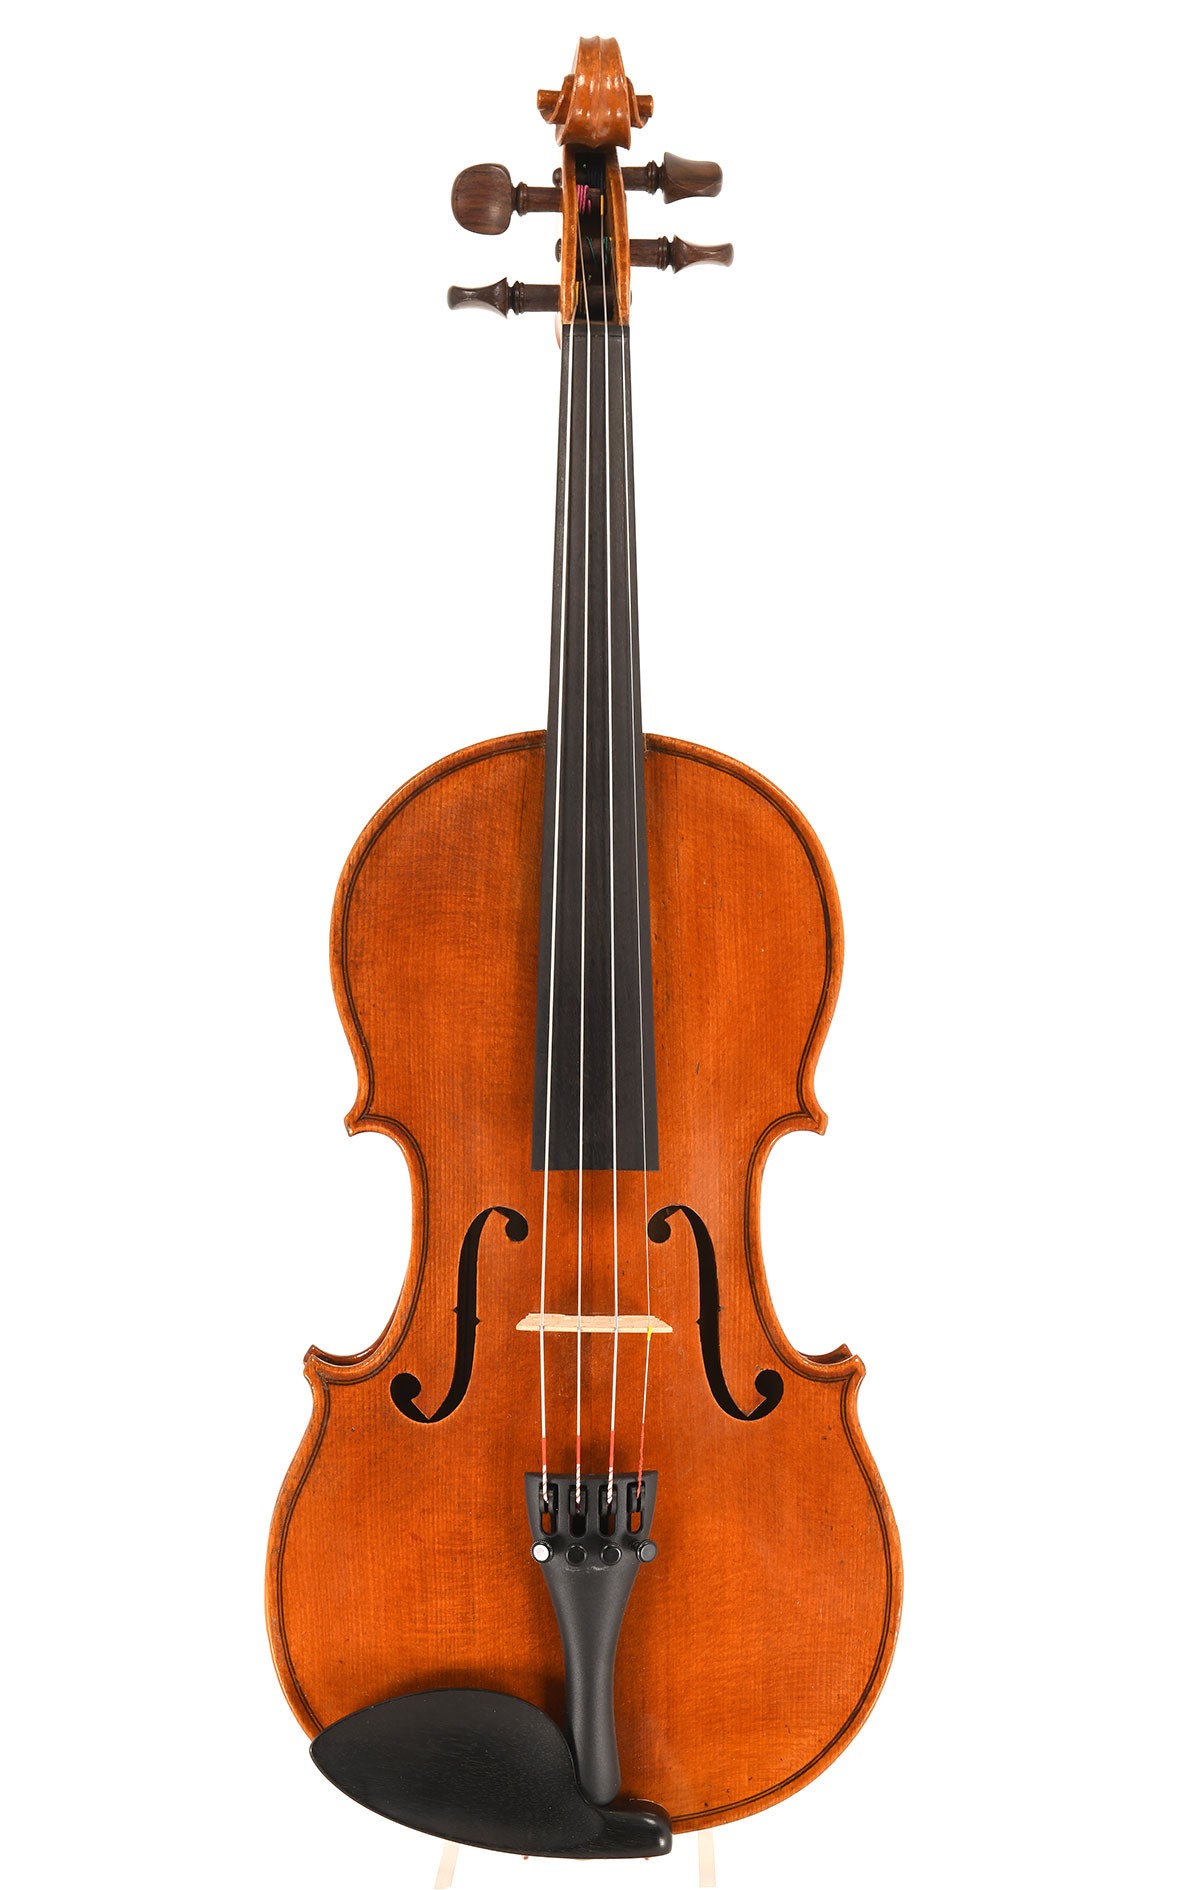 Excellent French 3/4 violin of Mirecourt